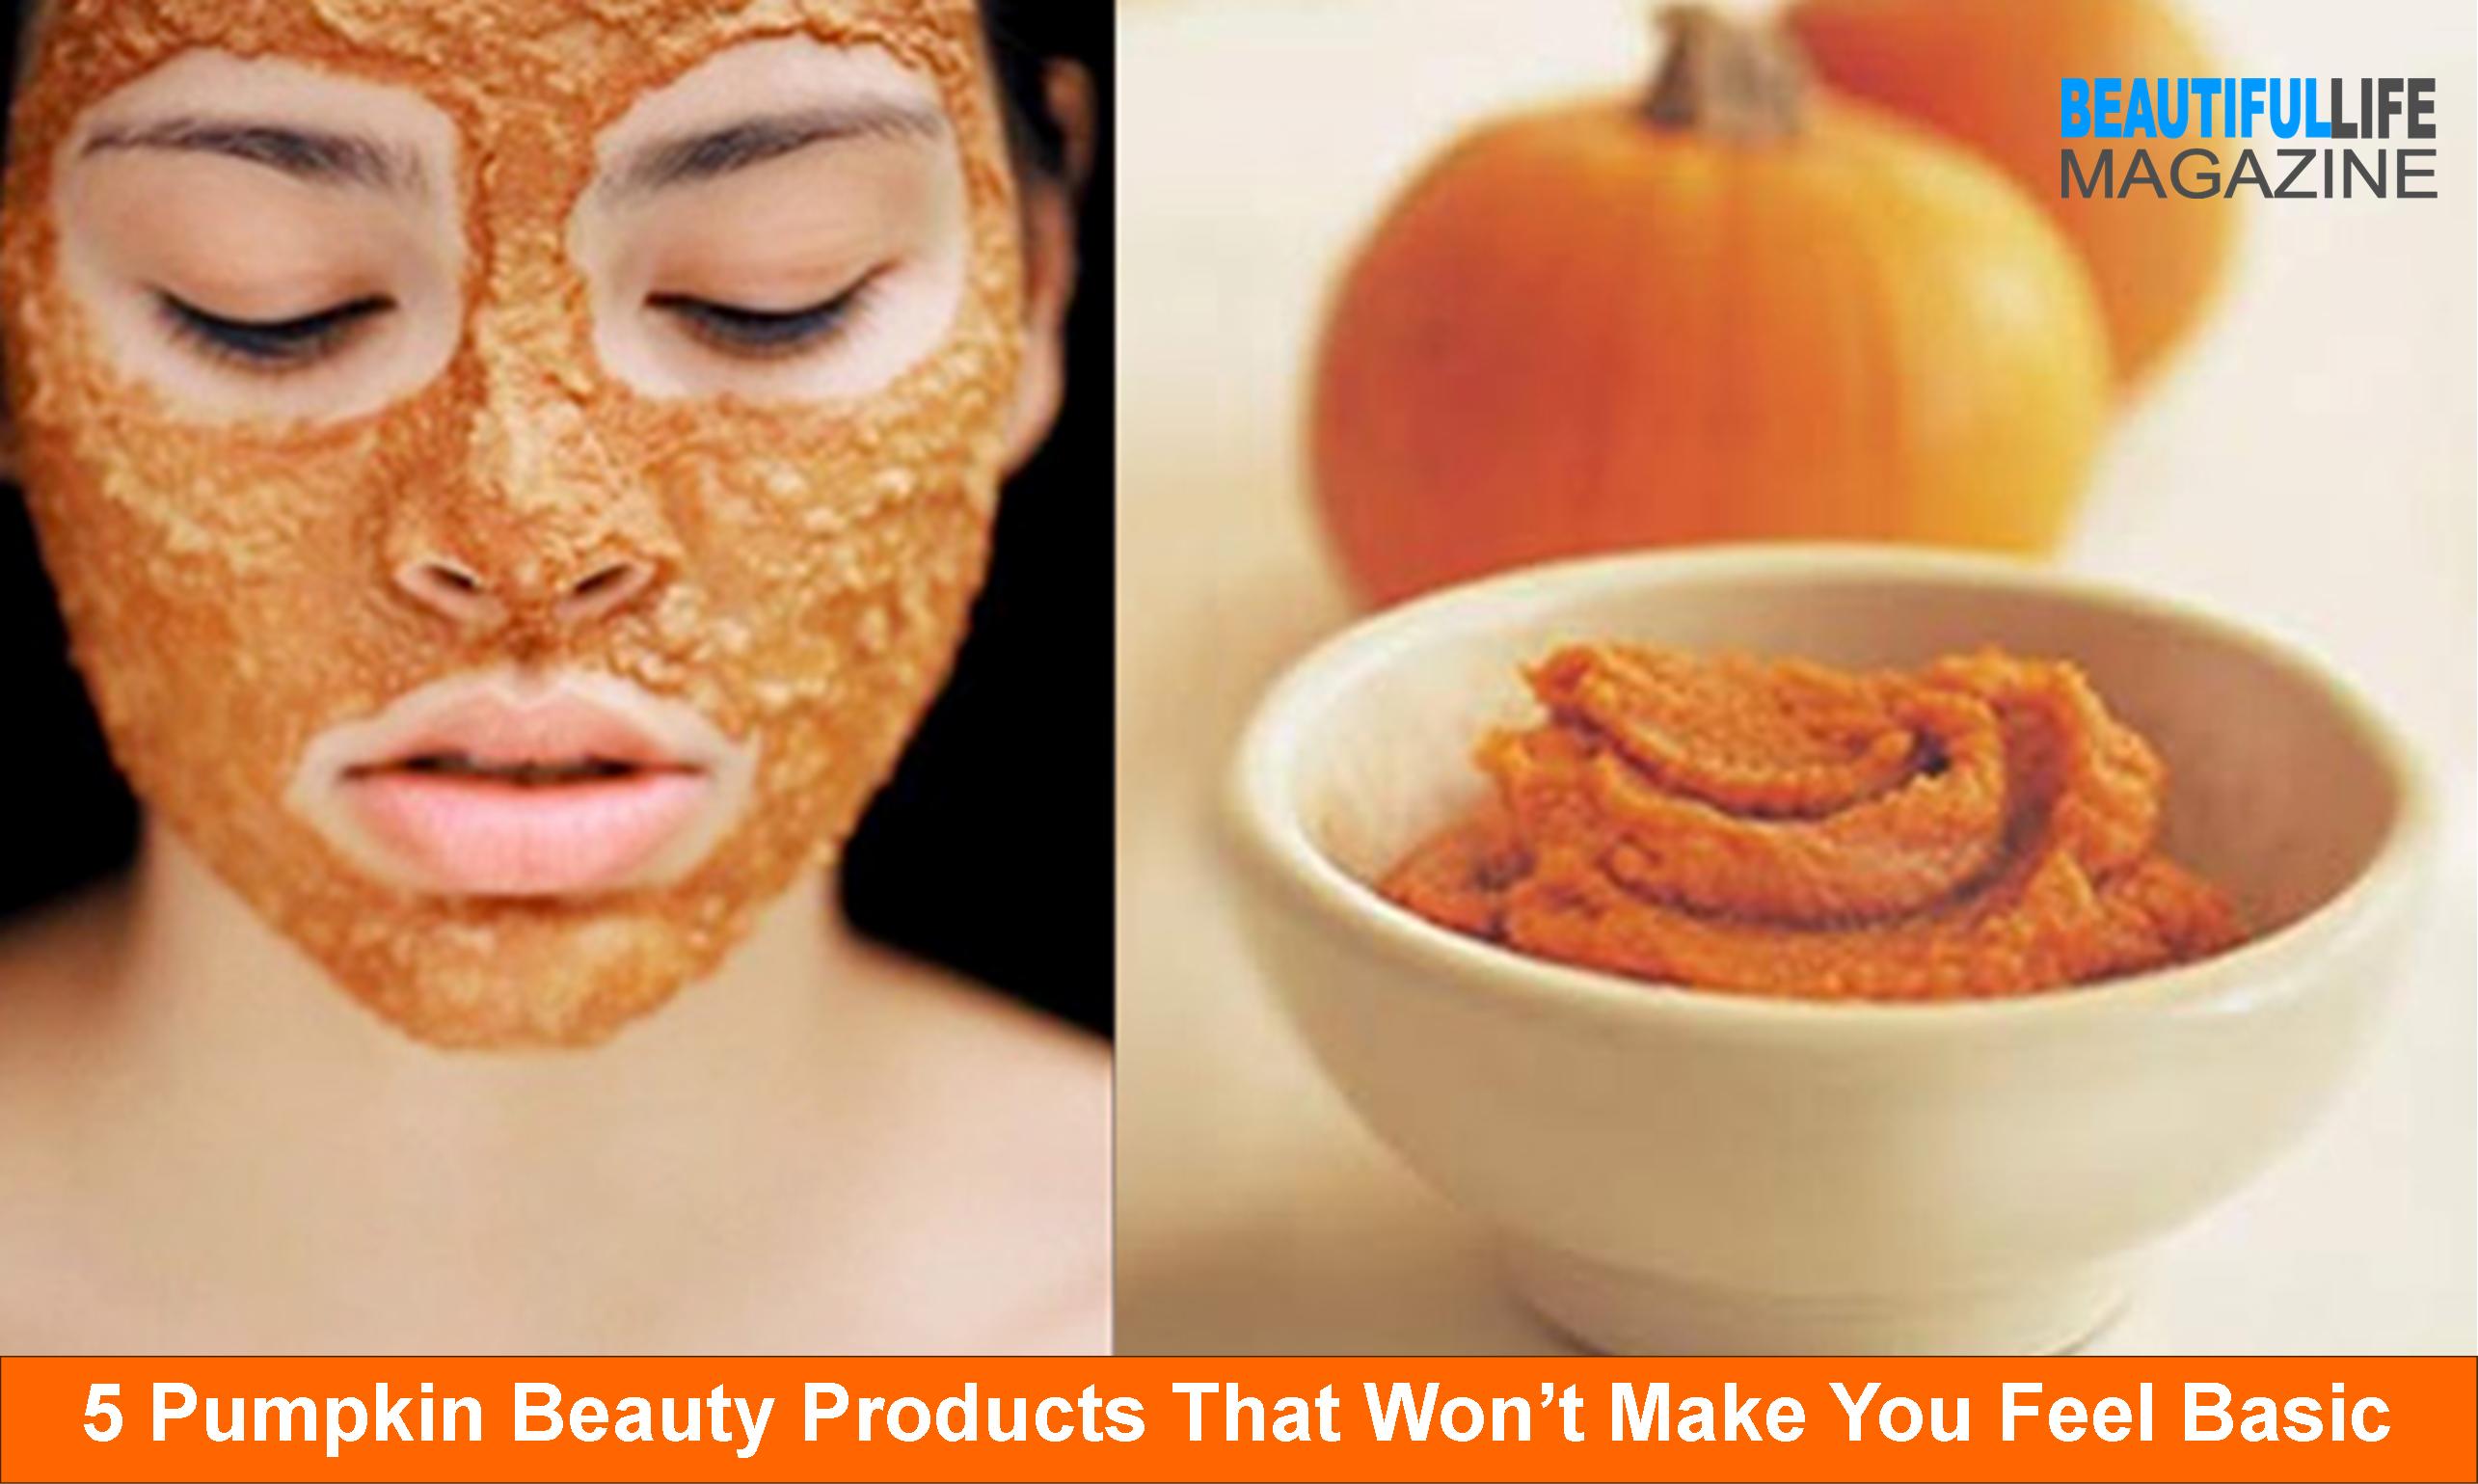 It’s worth noting that pumpkin beauty with extract is packed with antioxidants vitamins A and C. Those powerhouse compounds can help boost collagen.